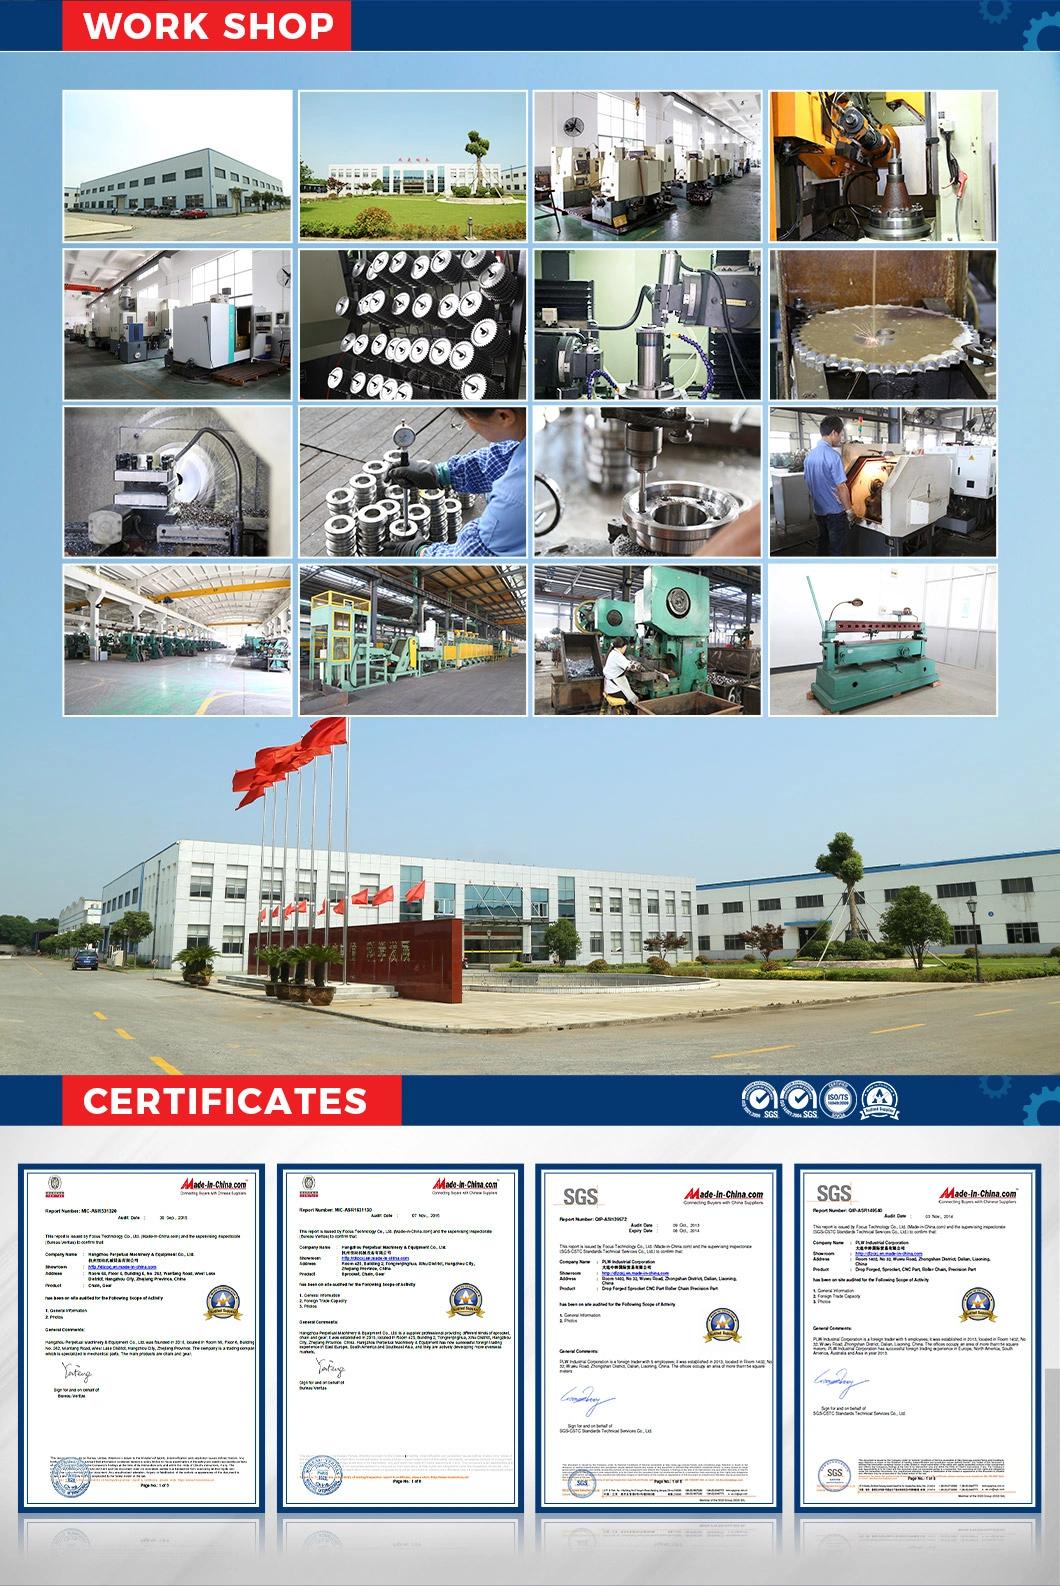 Agriculture Machinery Parts Made in China Agricultural Chain with Attachment